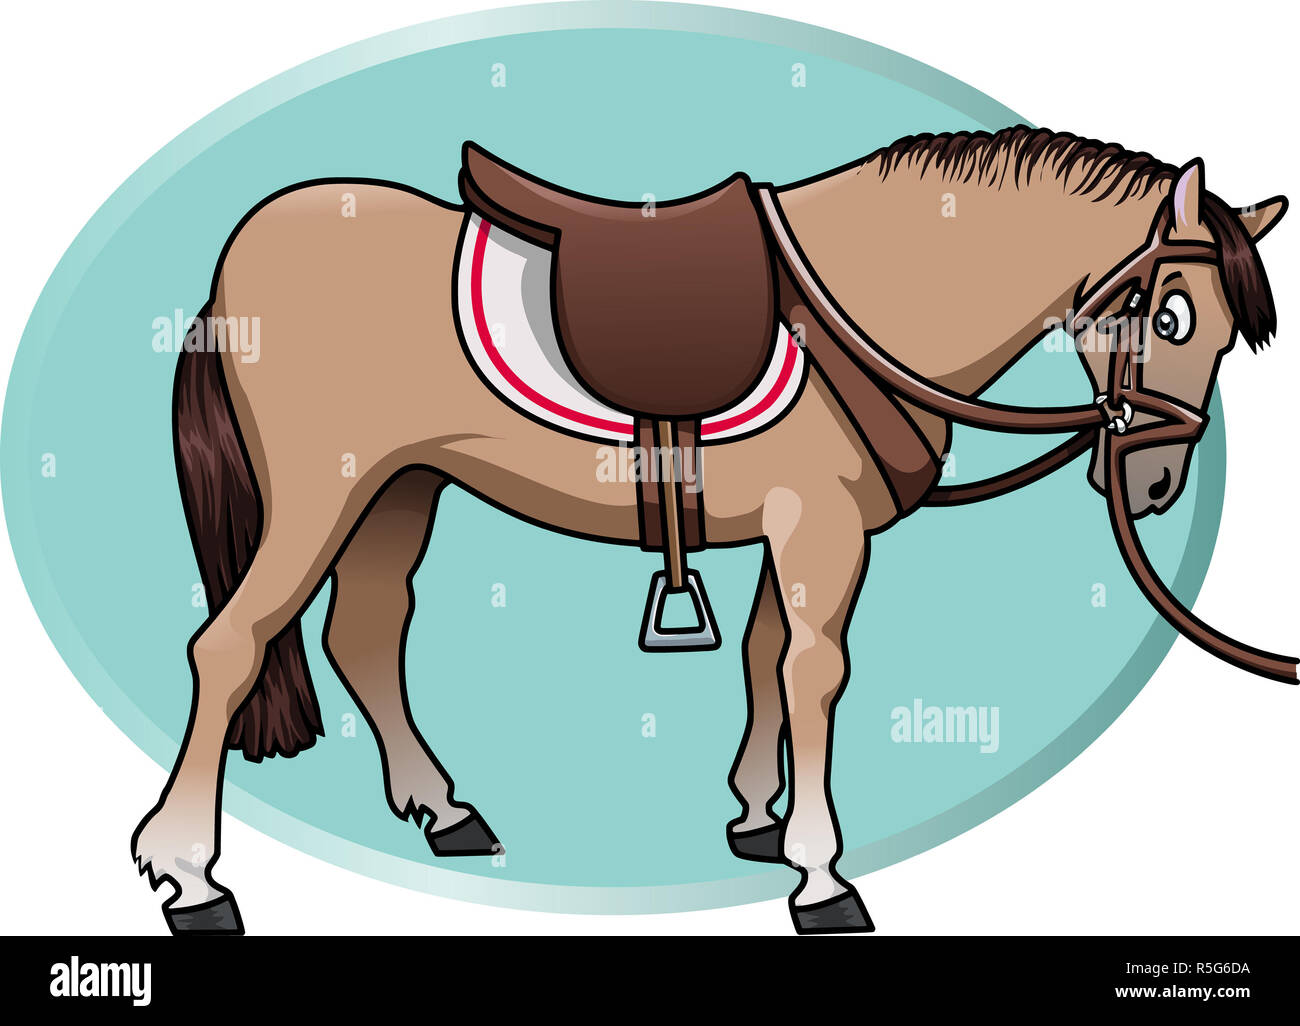 Cartoon-style illustration of a cute brown horse with saddle and reins. An aquamarine oval shape on the background Stock Photo